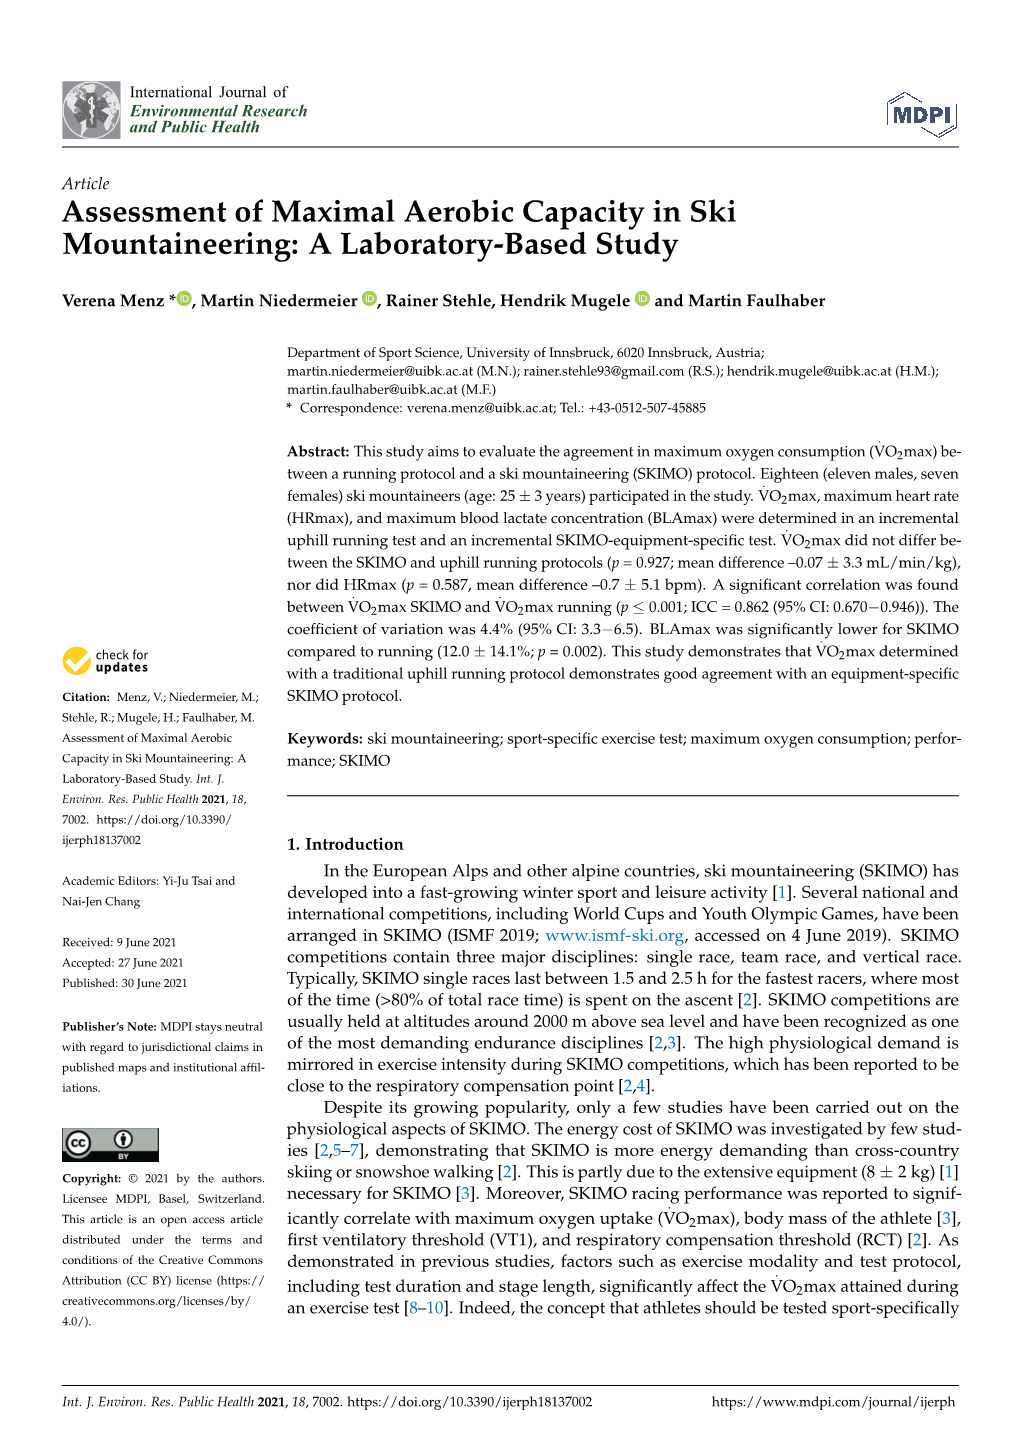 Assessment of Maximal Aerobic Capacity in Ski Mountaineering: a Laboratory-Based Study